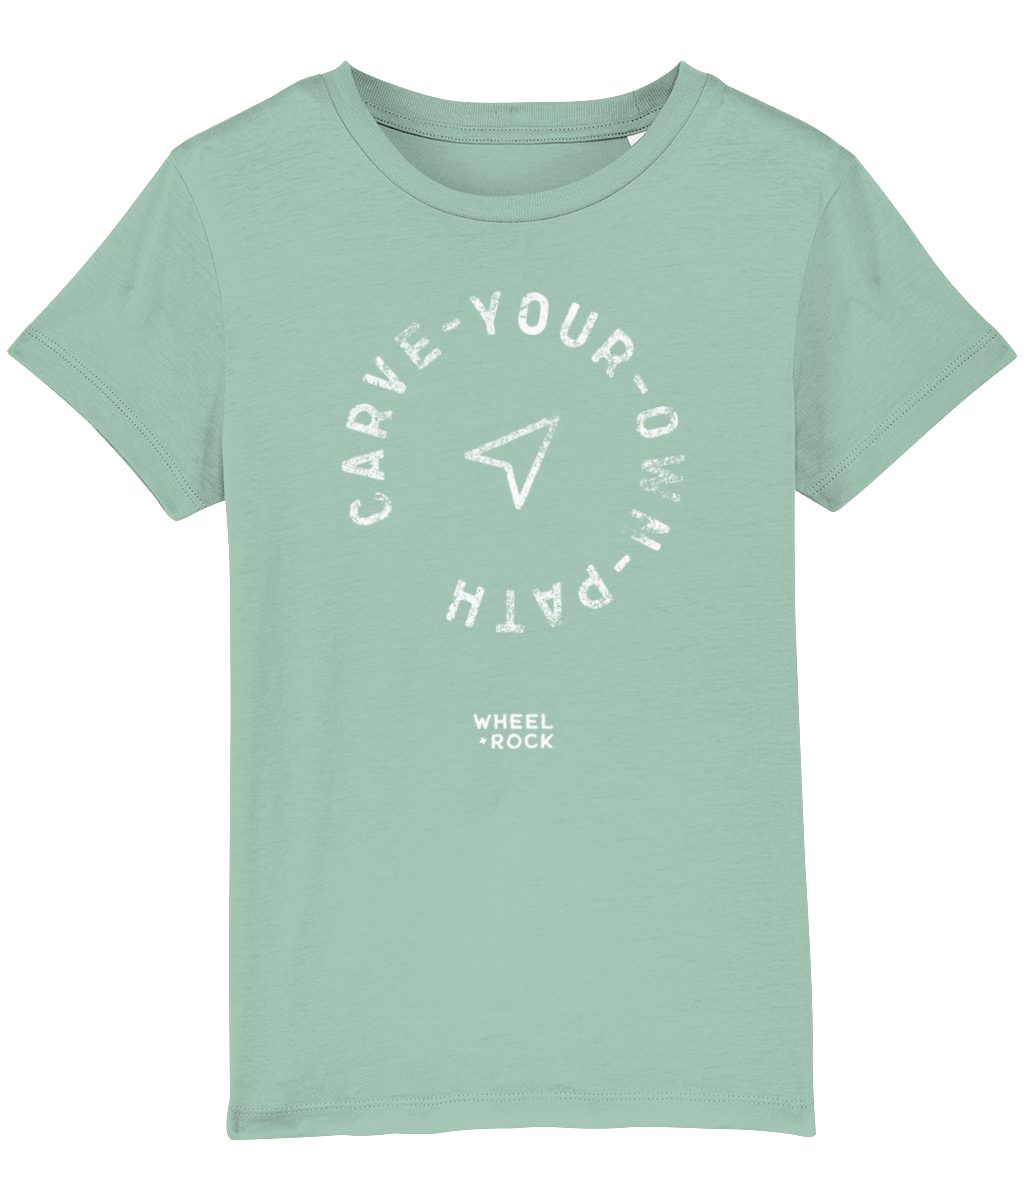 Carve Your Own Path - Kids Tee - GREENS